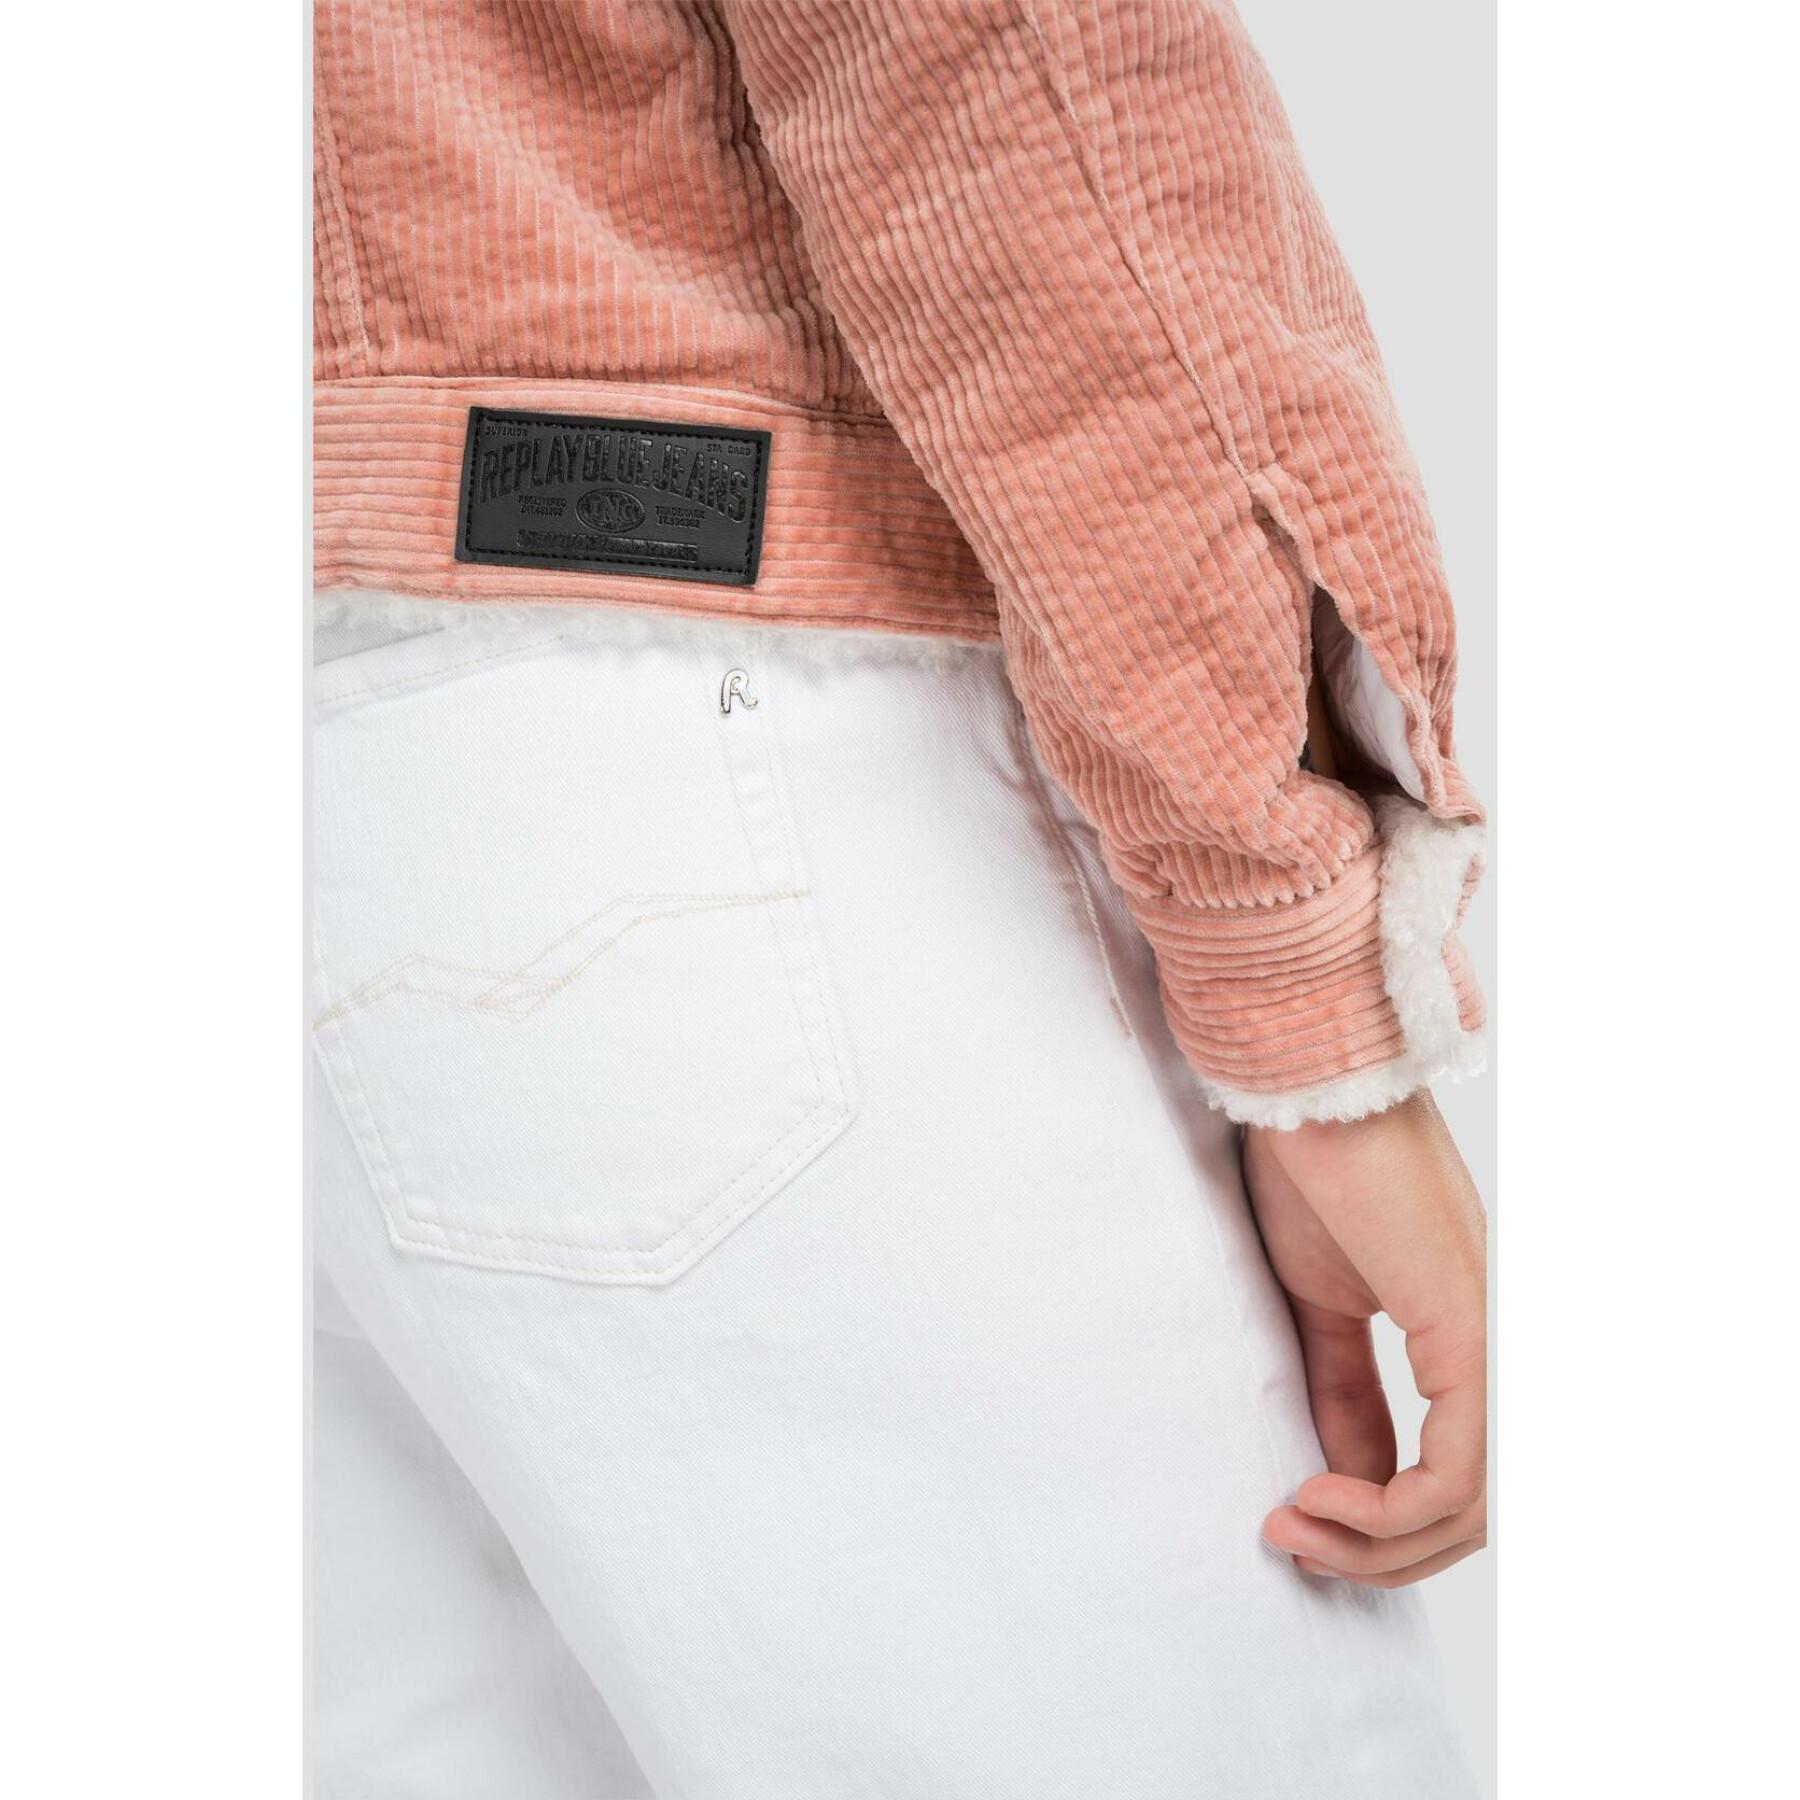 Women's corduroy jacket with pockets Replay